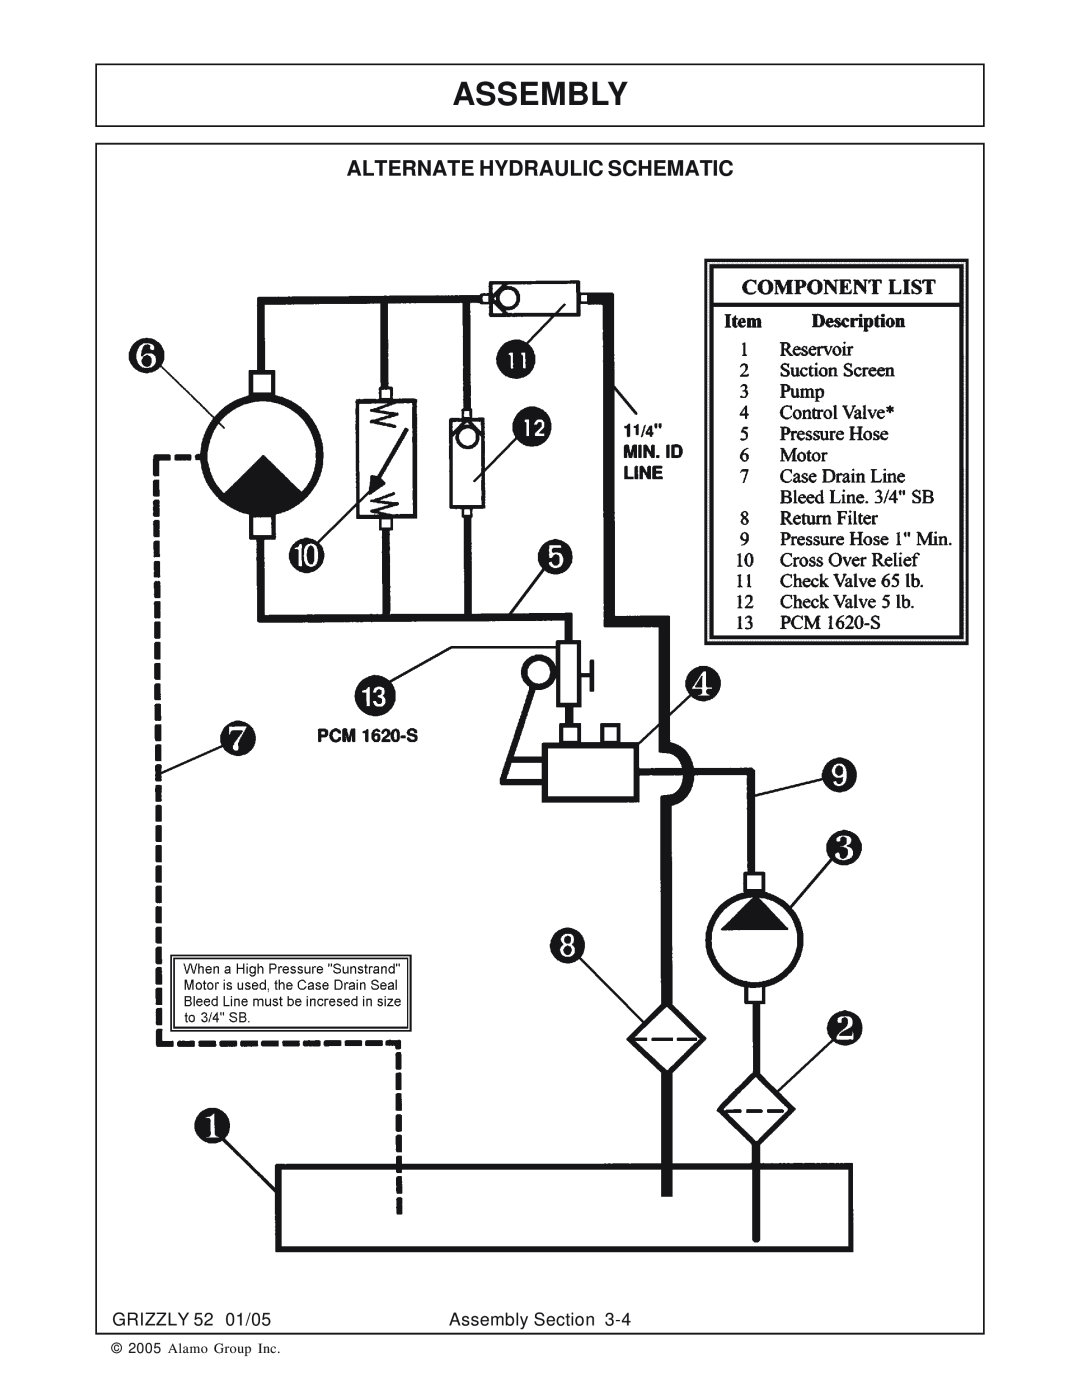 Grizzly 52 manual Assembly, Alternate Hydraulic Schematic, Alamo Group Inc 